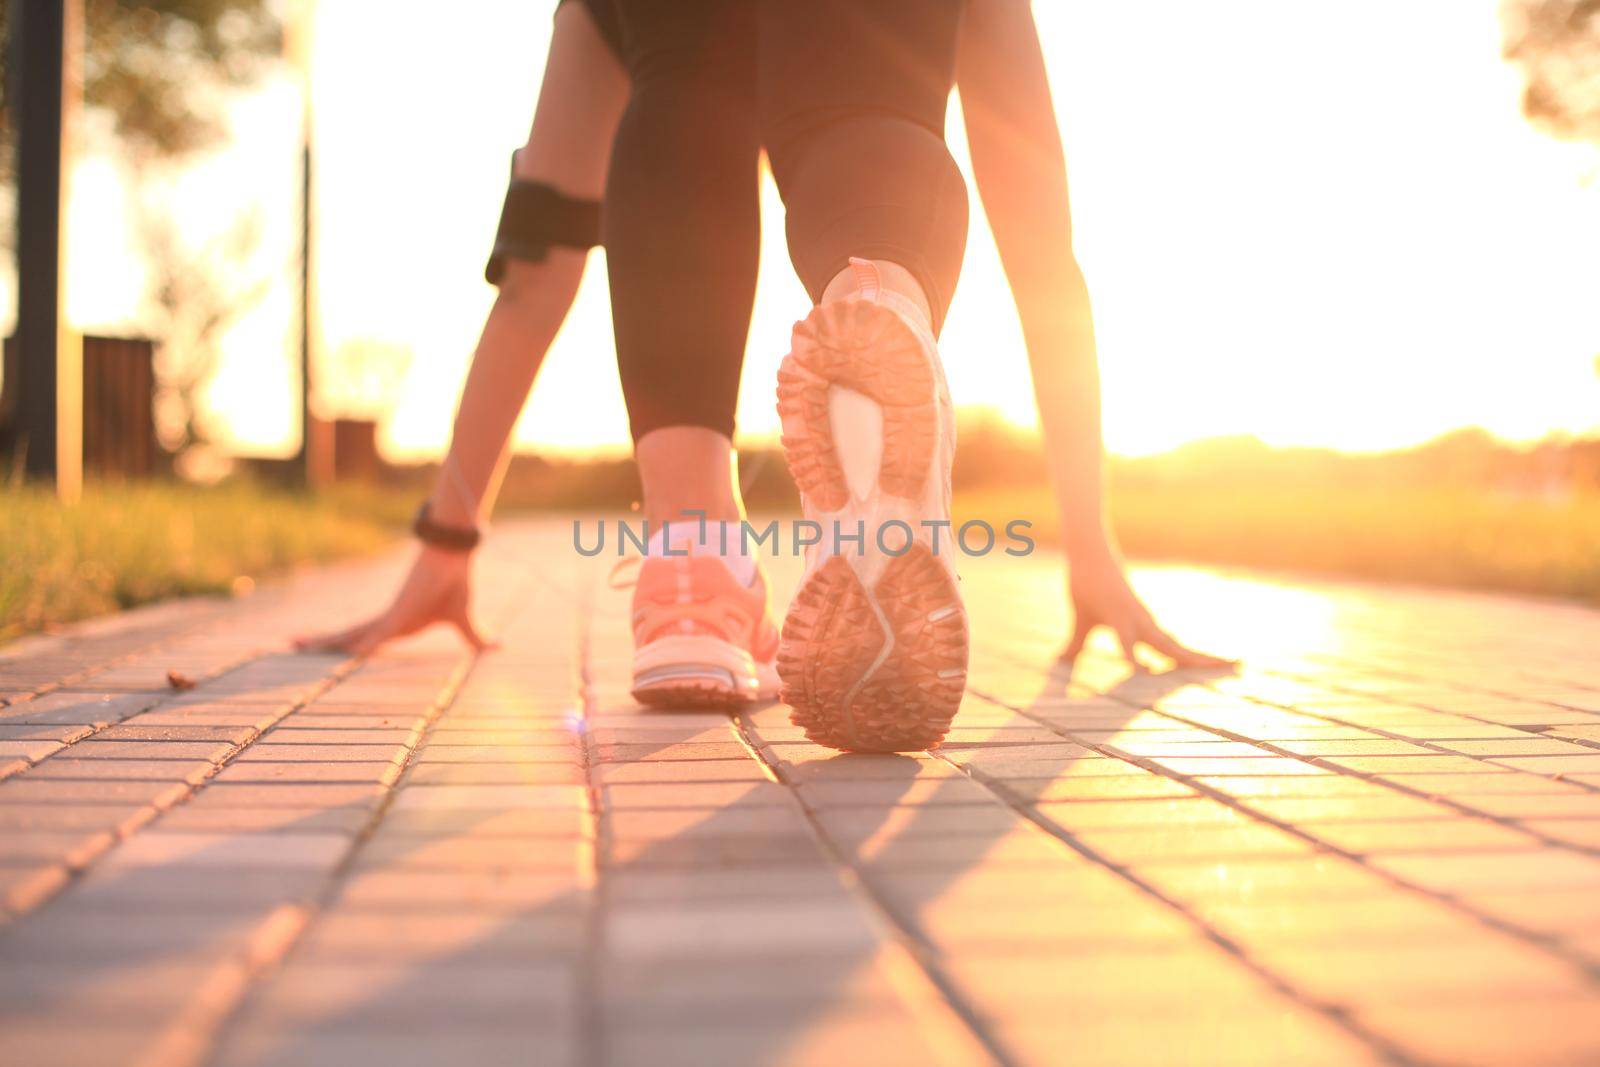 Runner feet running on road closeup on shoe, outdoor at sunset or sunrise in city